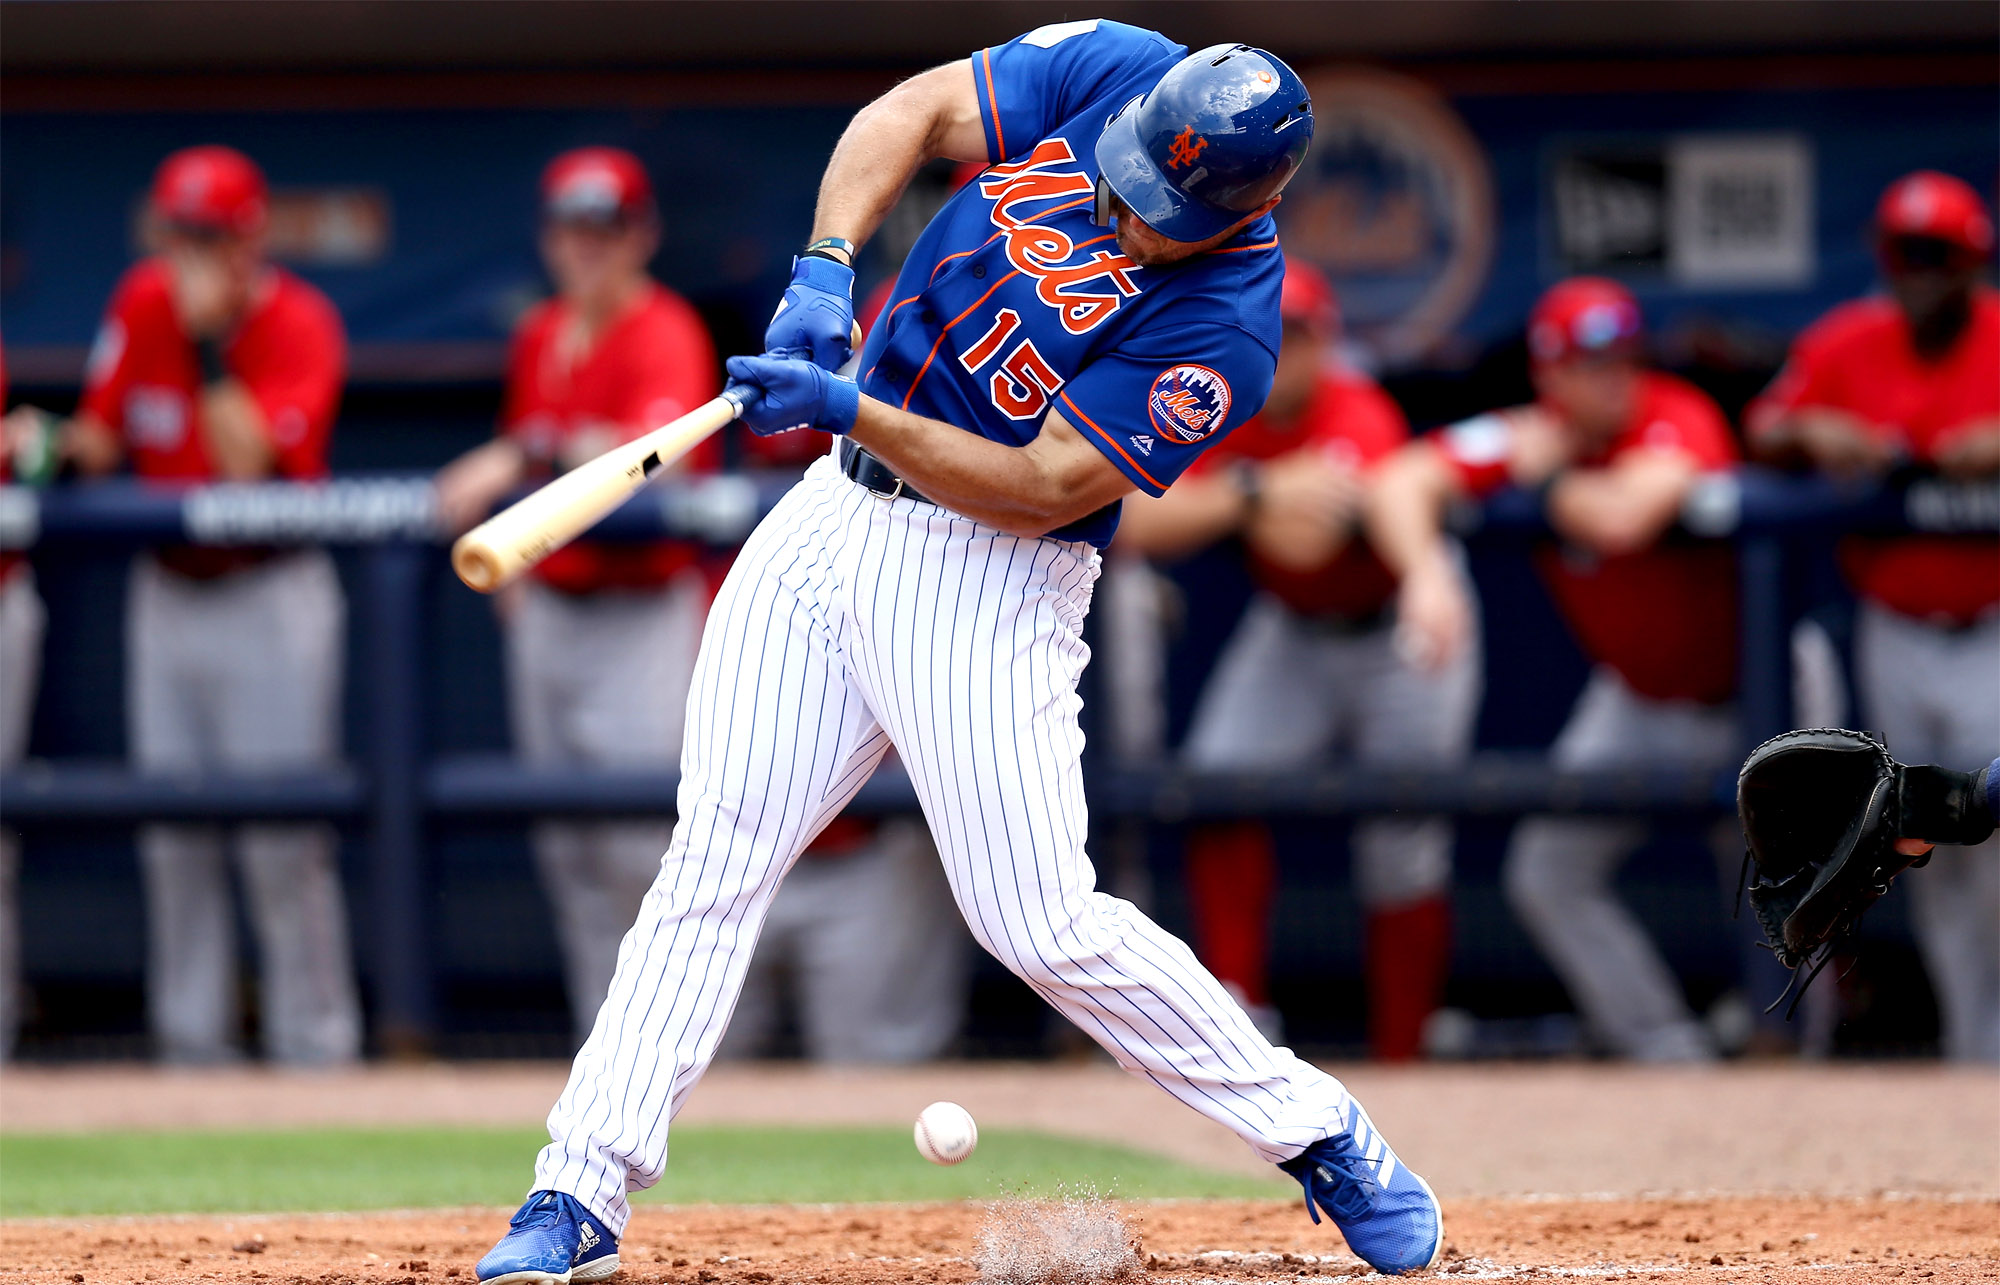 Tim Tebow, Who Is Back In Mets Camp, Was The Worst Hitter In Triple-A In 2019 Based On Much Every Statistic - BroBible